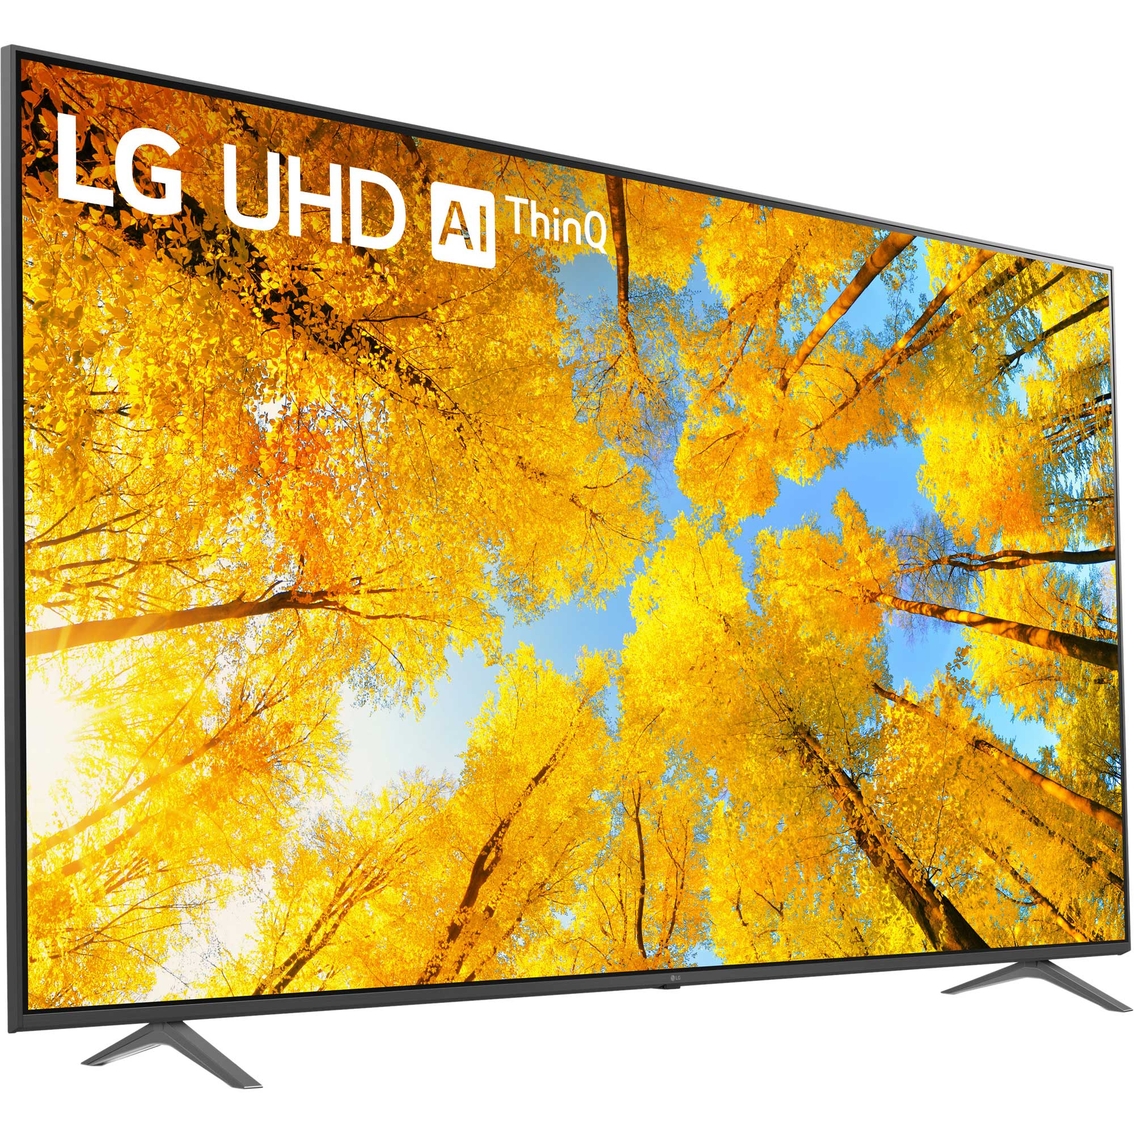 LG 86 in. 4K HDR Smart TV with AI ThinQ 86UQ7590PUD - Image 4 of 9